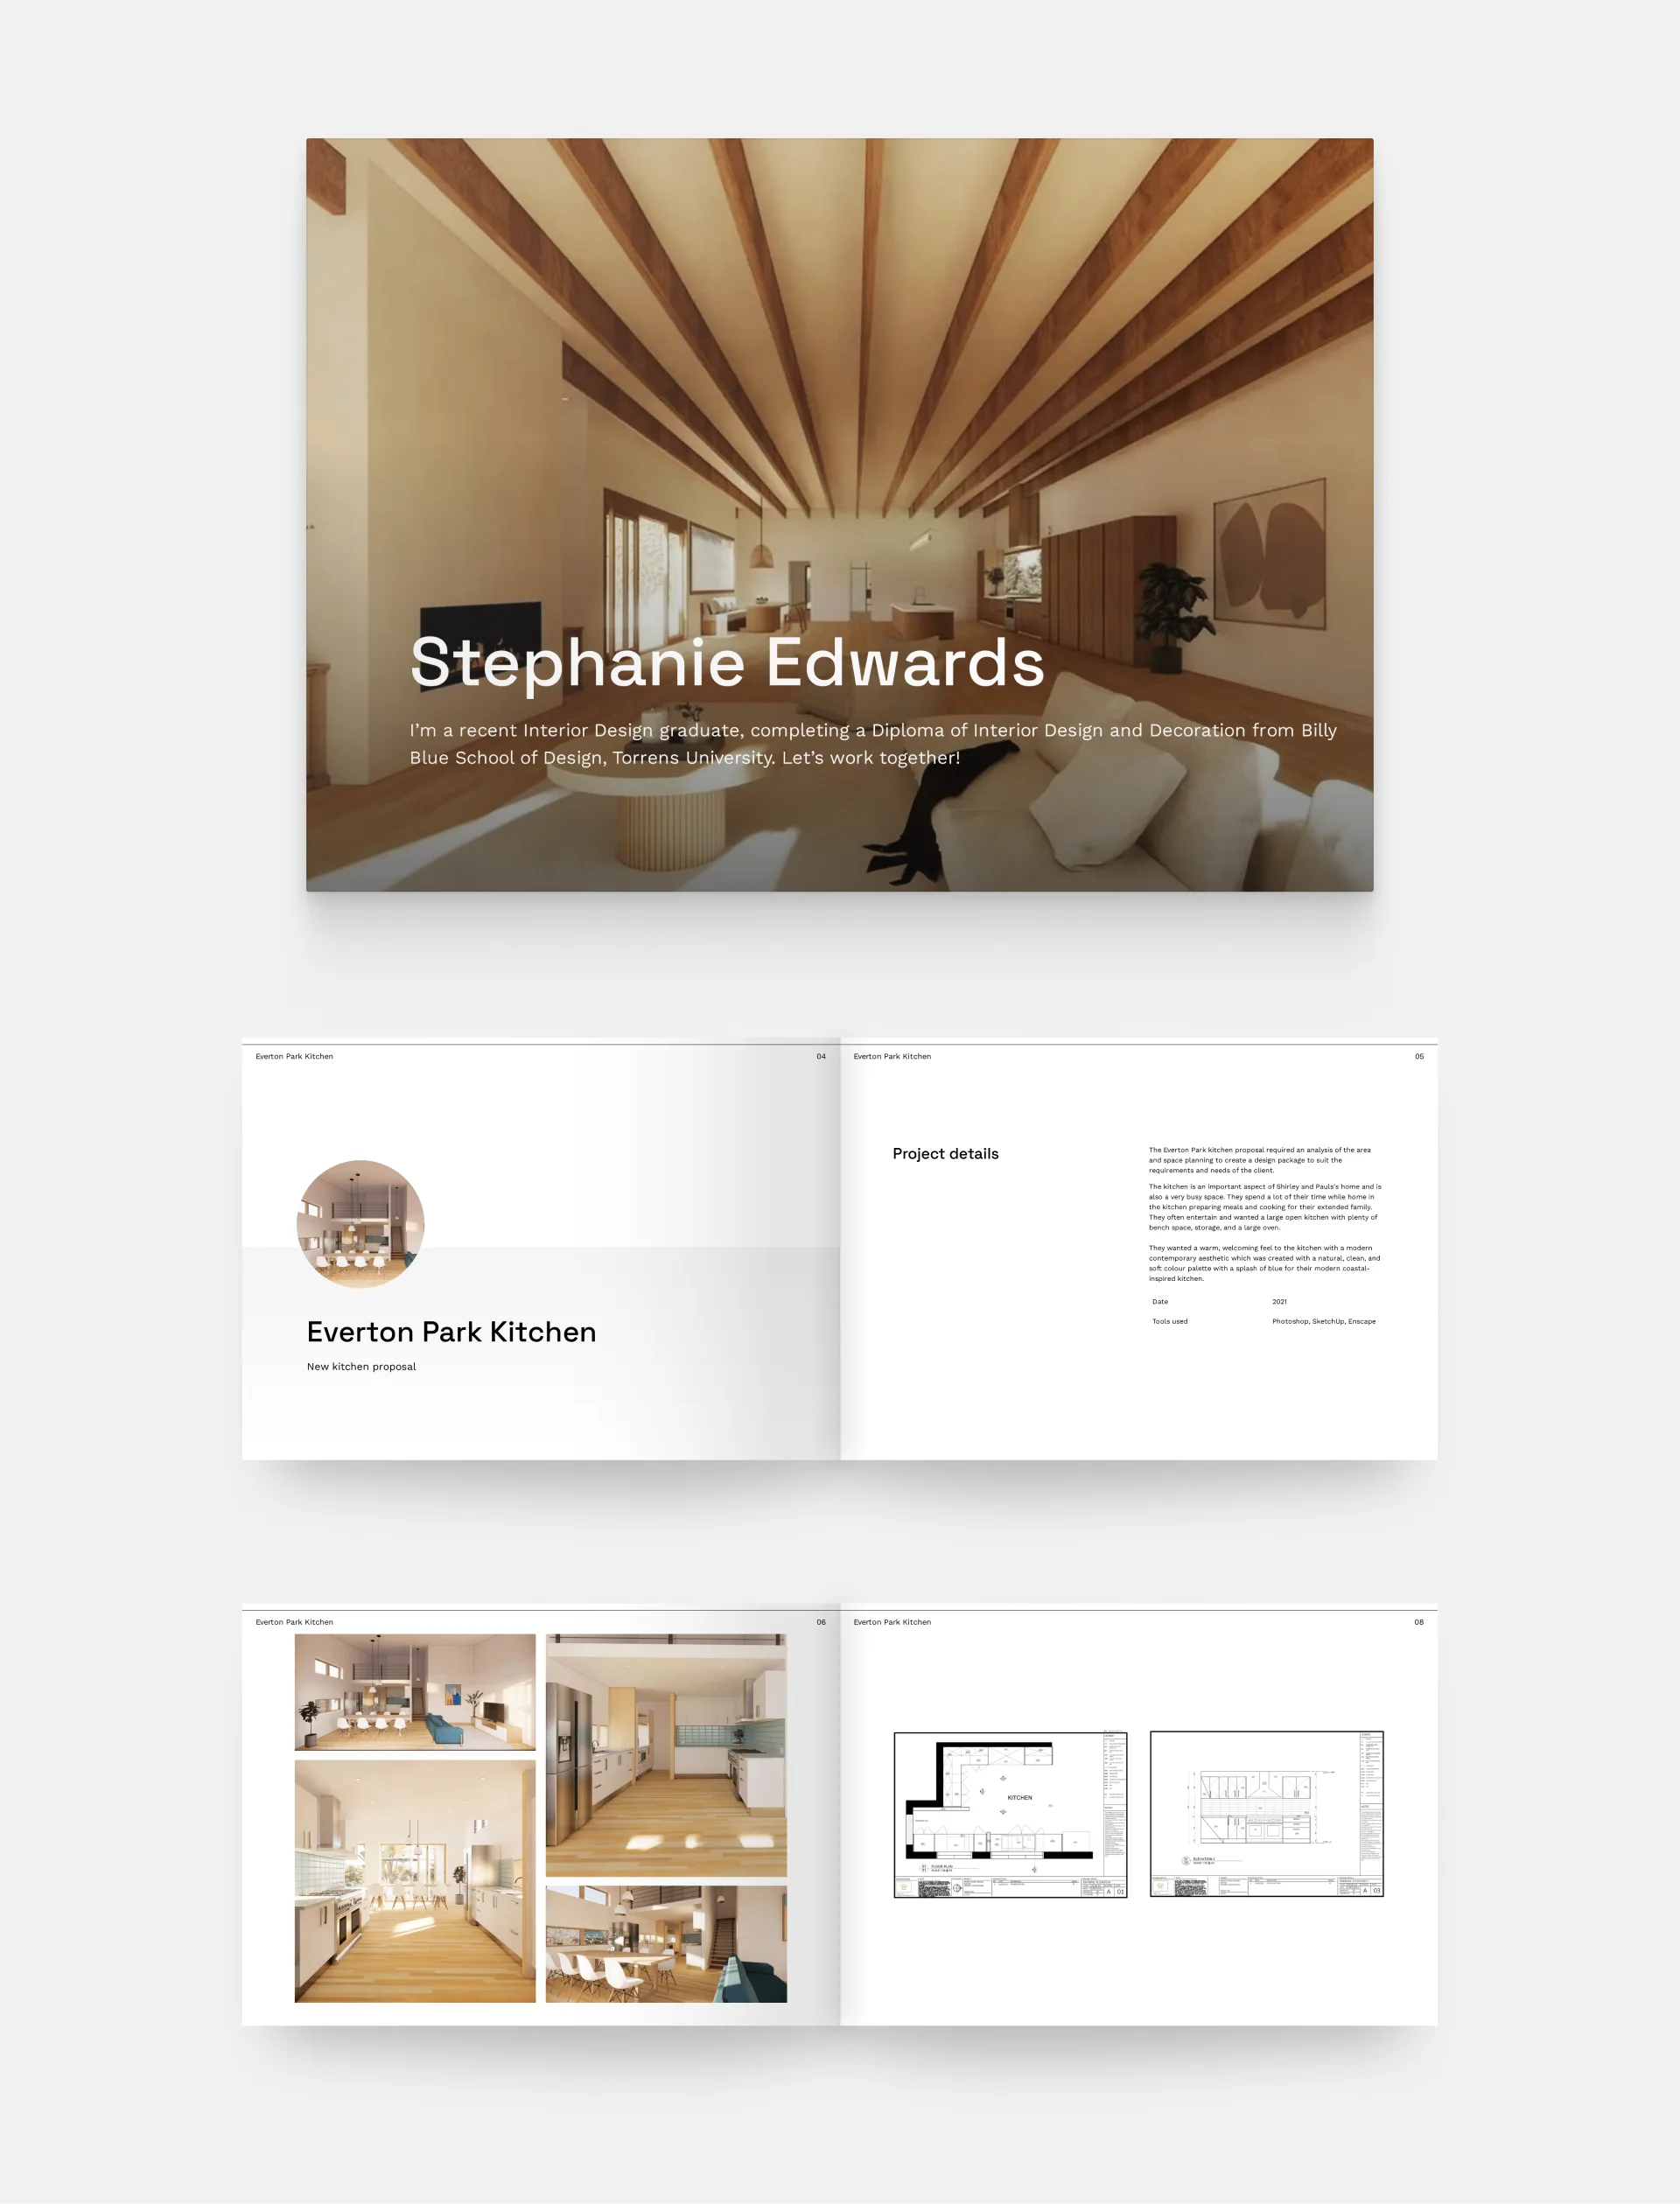 Screenshot of 5 pages from Stephanie Edwards portfolio: the cover that depicts a modern living room with exposed beams, and 4 regular portfolio pages. 